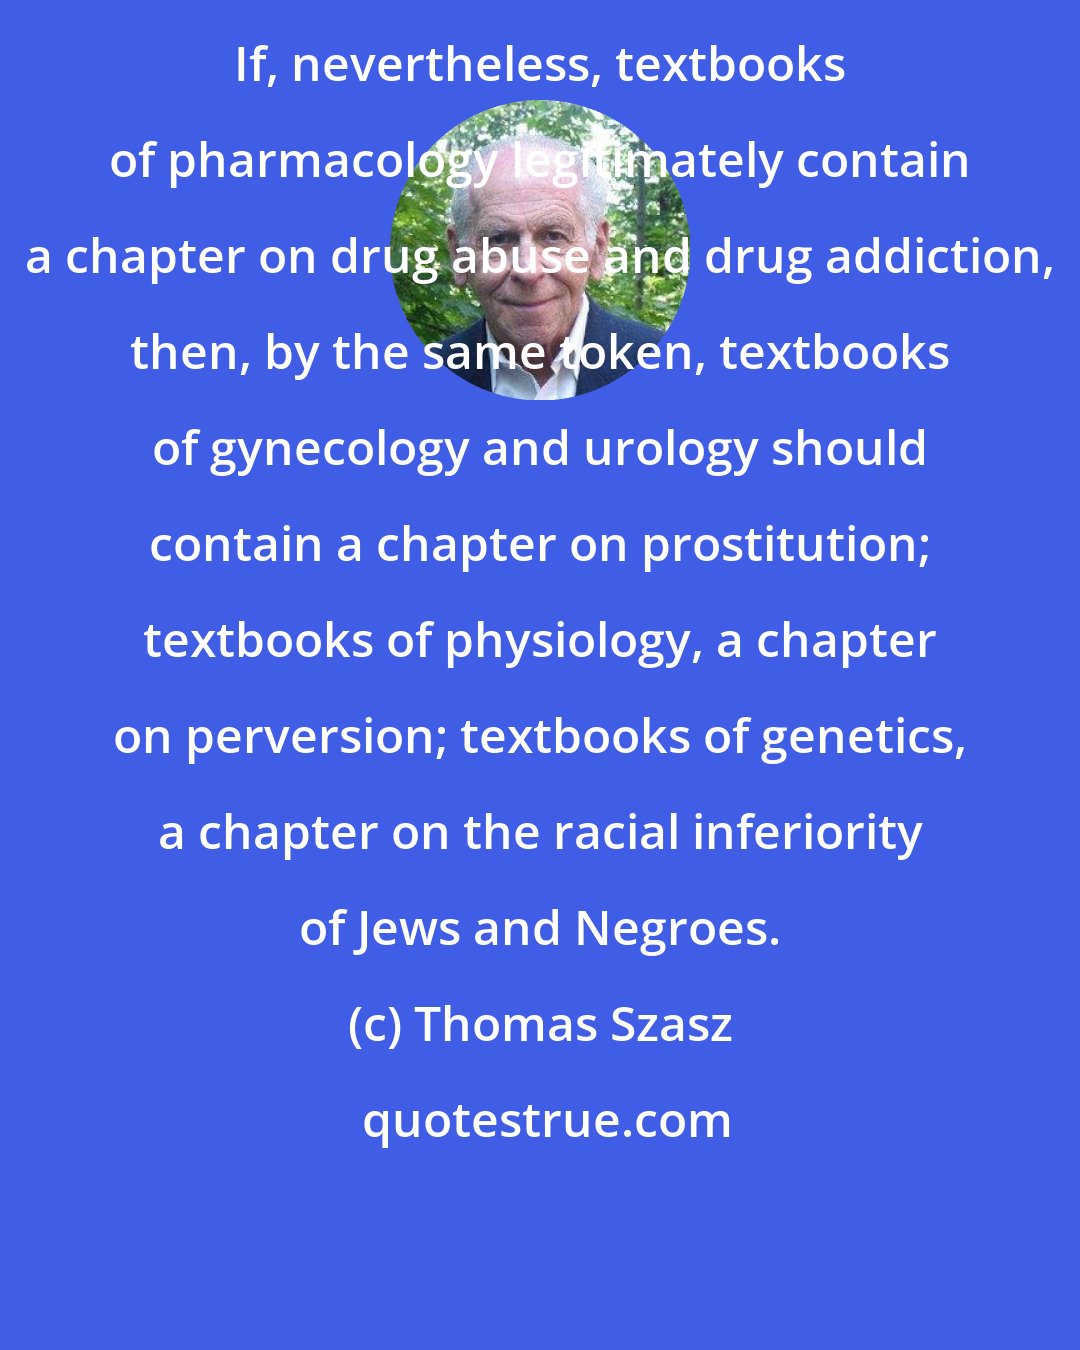 Thomas Szasz: If, nevertheless, textbooks of pharmacology legitimately contain a chapter on drug abuse and drug addiction, then, by the same token, textbooks of gynecology and urology should contain a chapter on prostitution; textbooks of physiology, a chapter on perversion; textbooks of genetics, a chapter on the racial inferiority of Jews and Negroes.